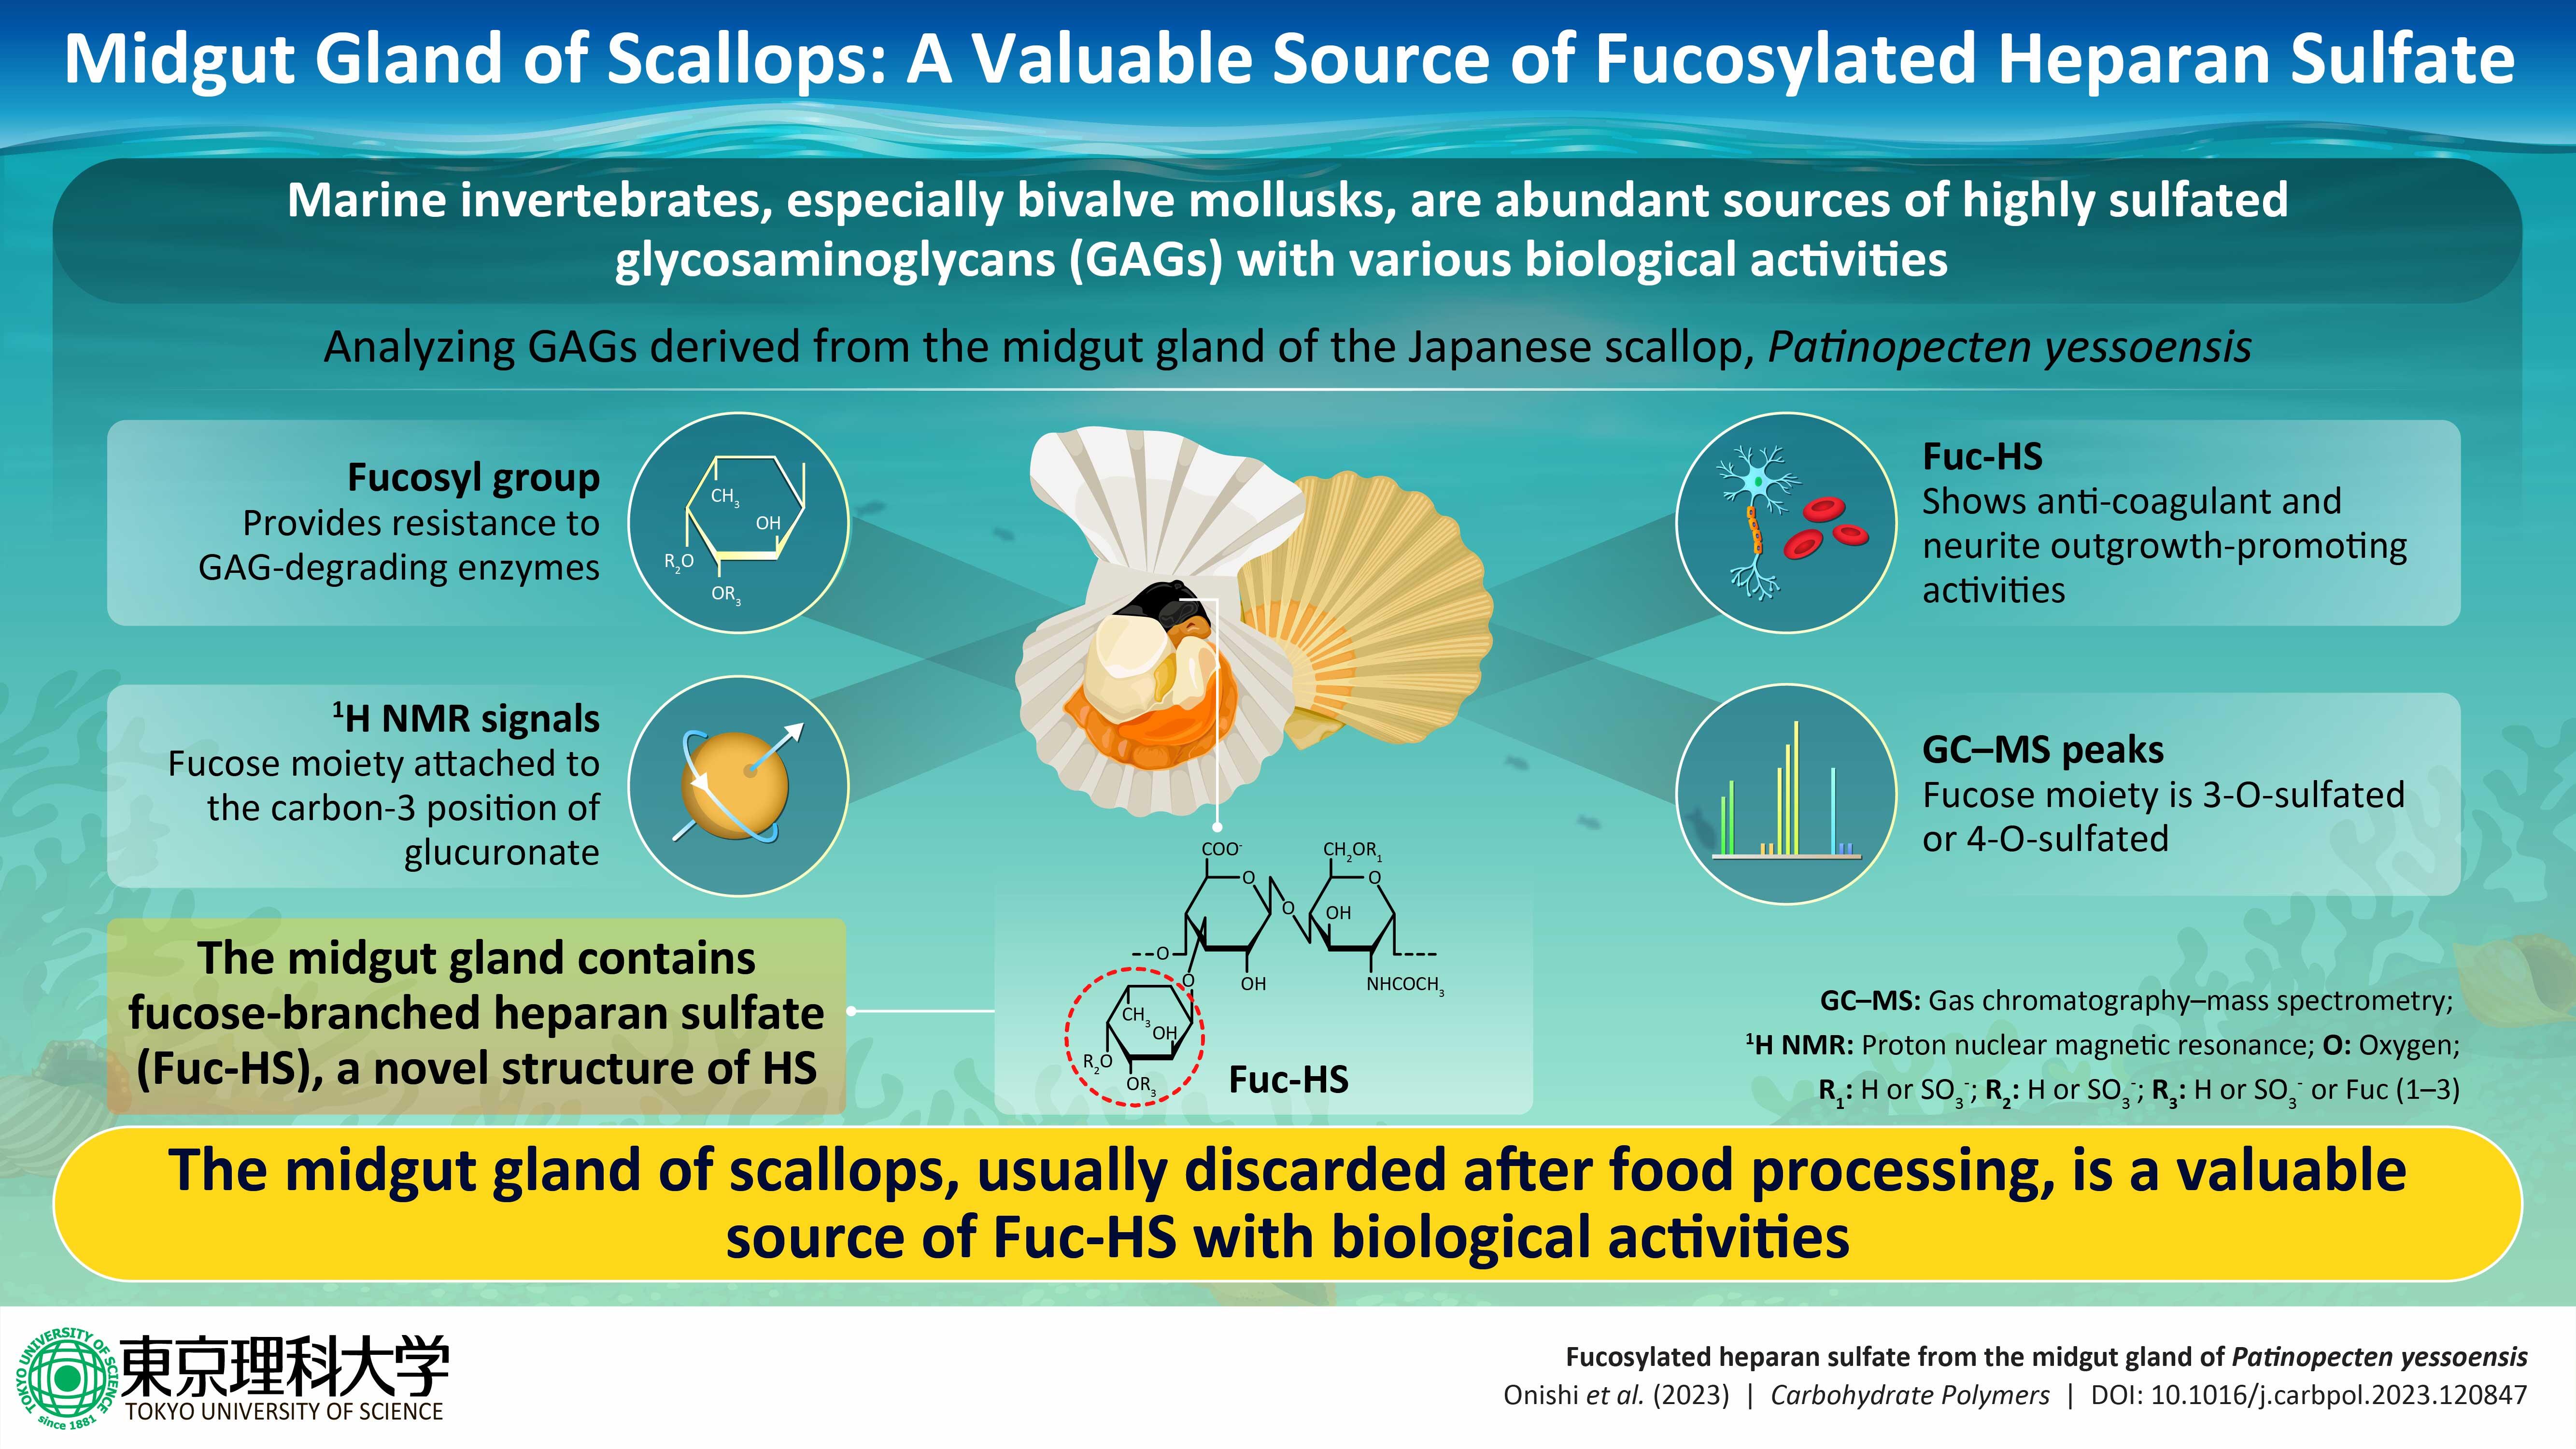 Midgut Gland of Scallops: A Valuable Source of Fucosylated Heparan Sulfate